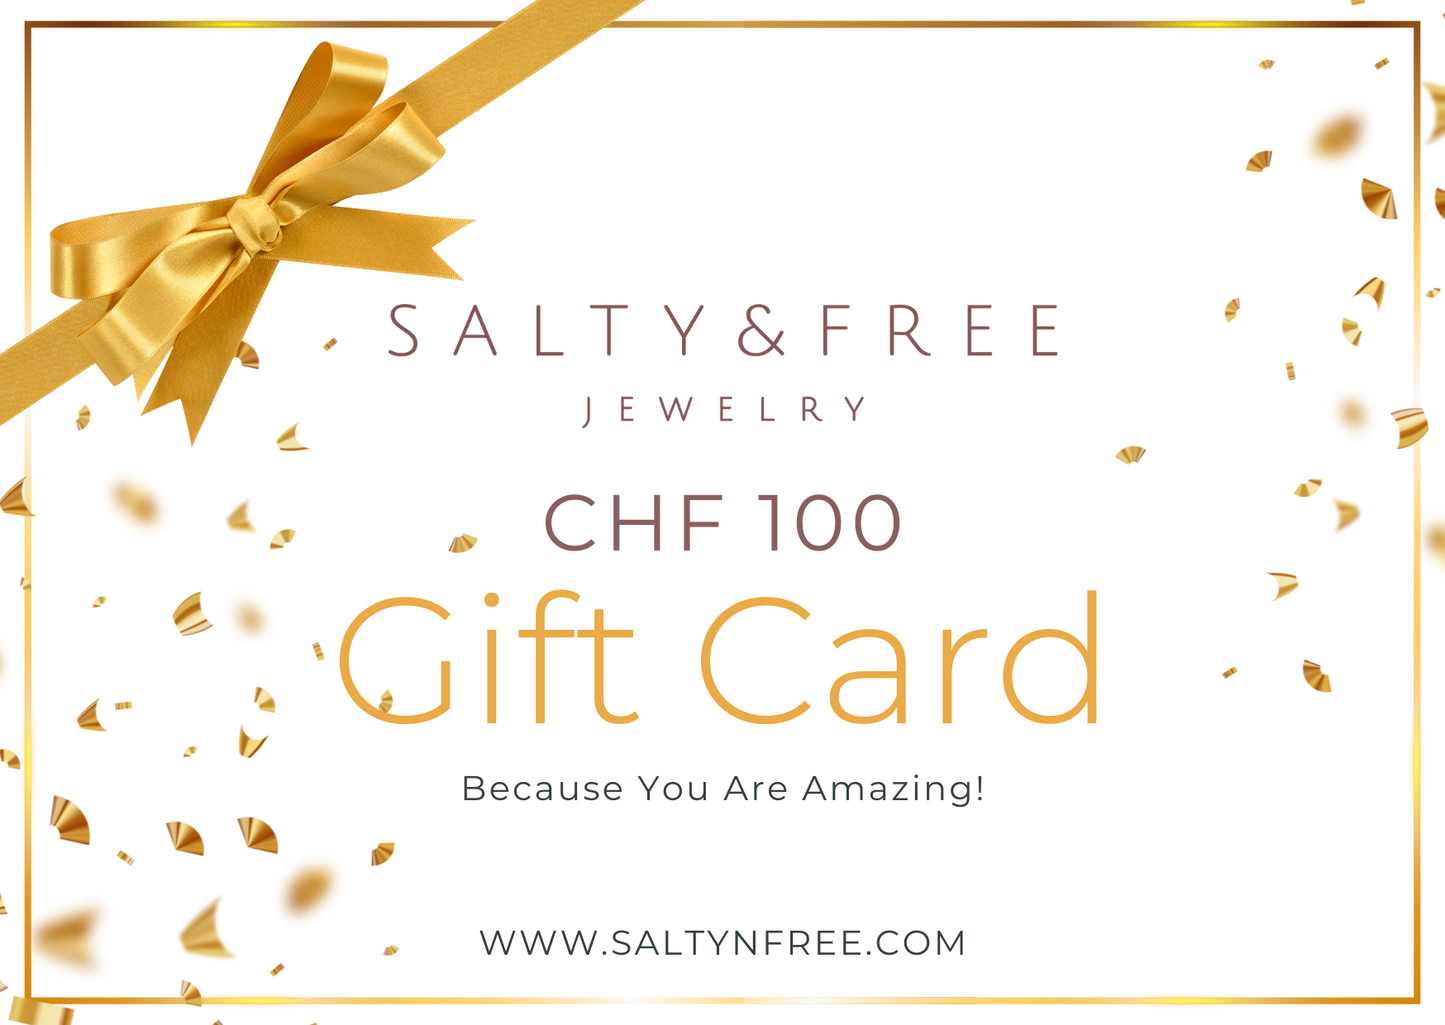 Salty & Free Gift Card "Because You Are Amazing!"